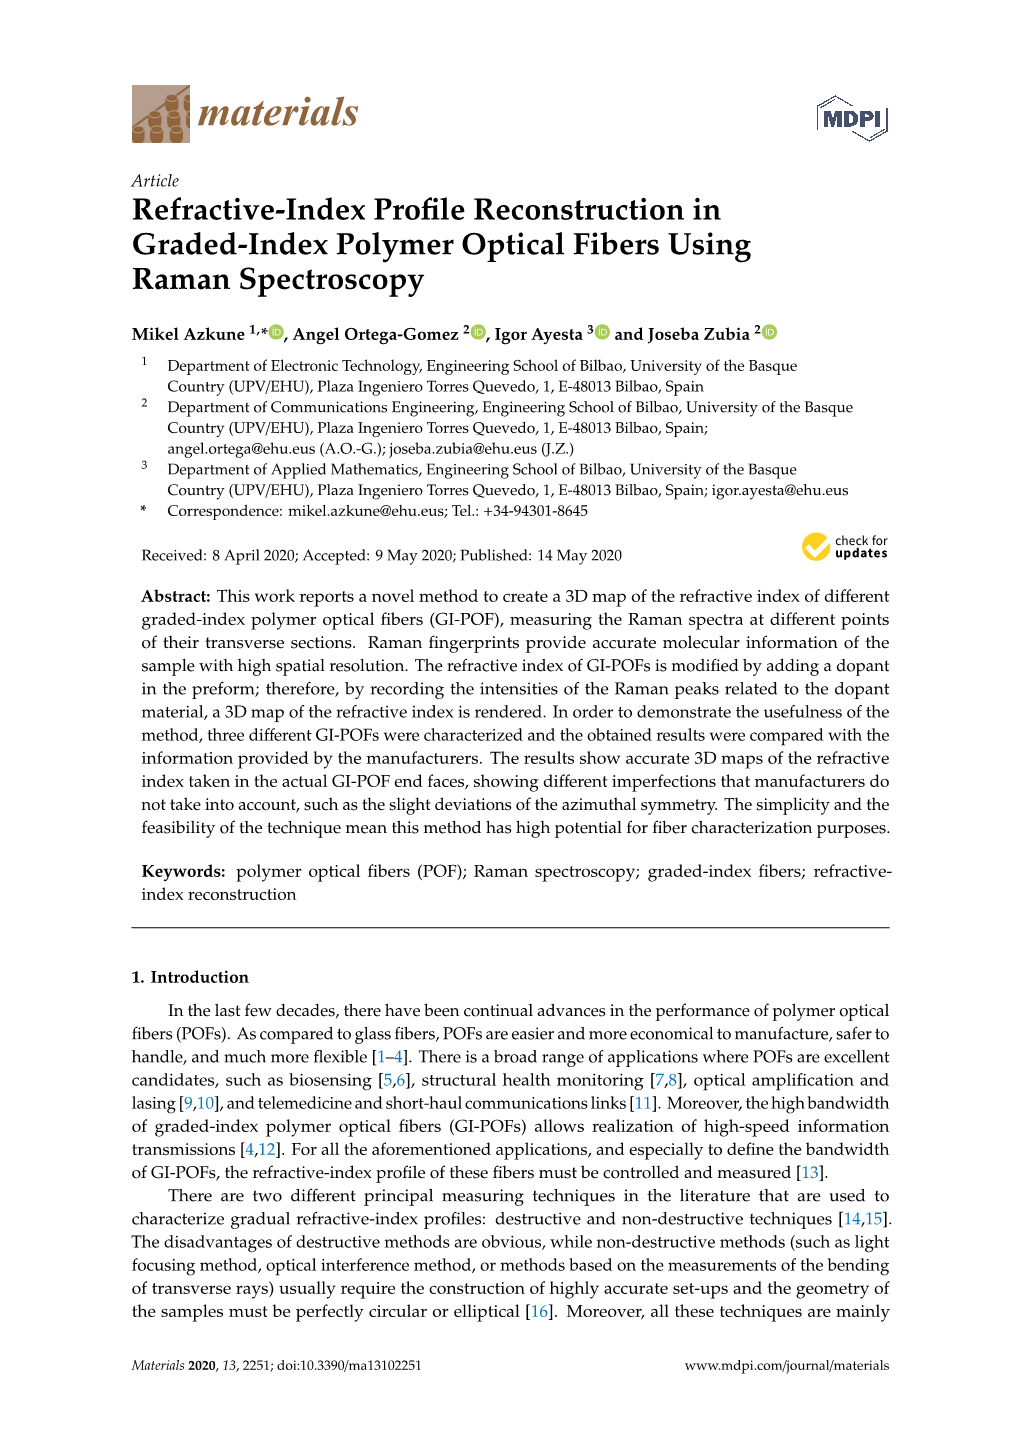 Refractive-Index Profile Reconstruction in Graded-Index Polymer Optical Fibers Using Raman Spectroscopy